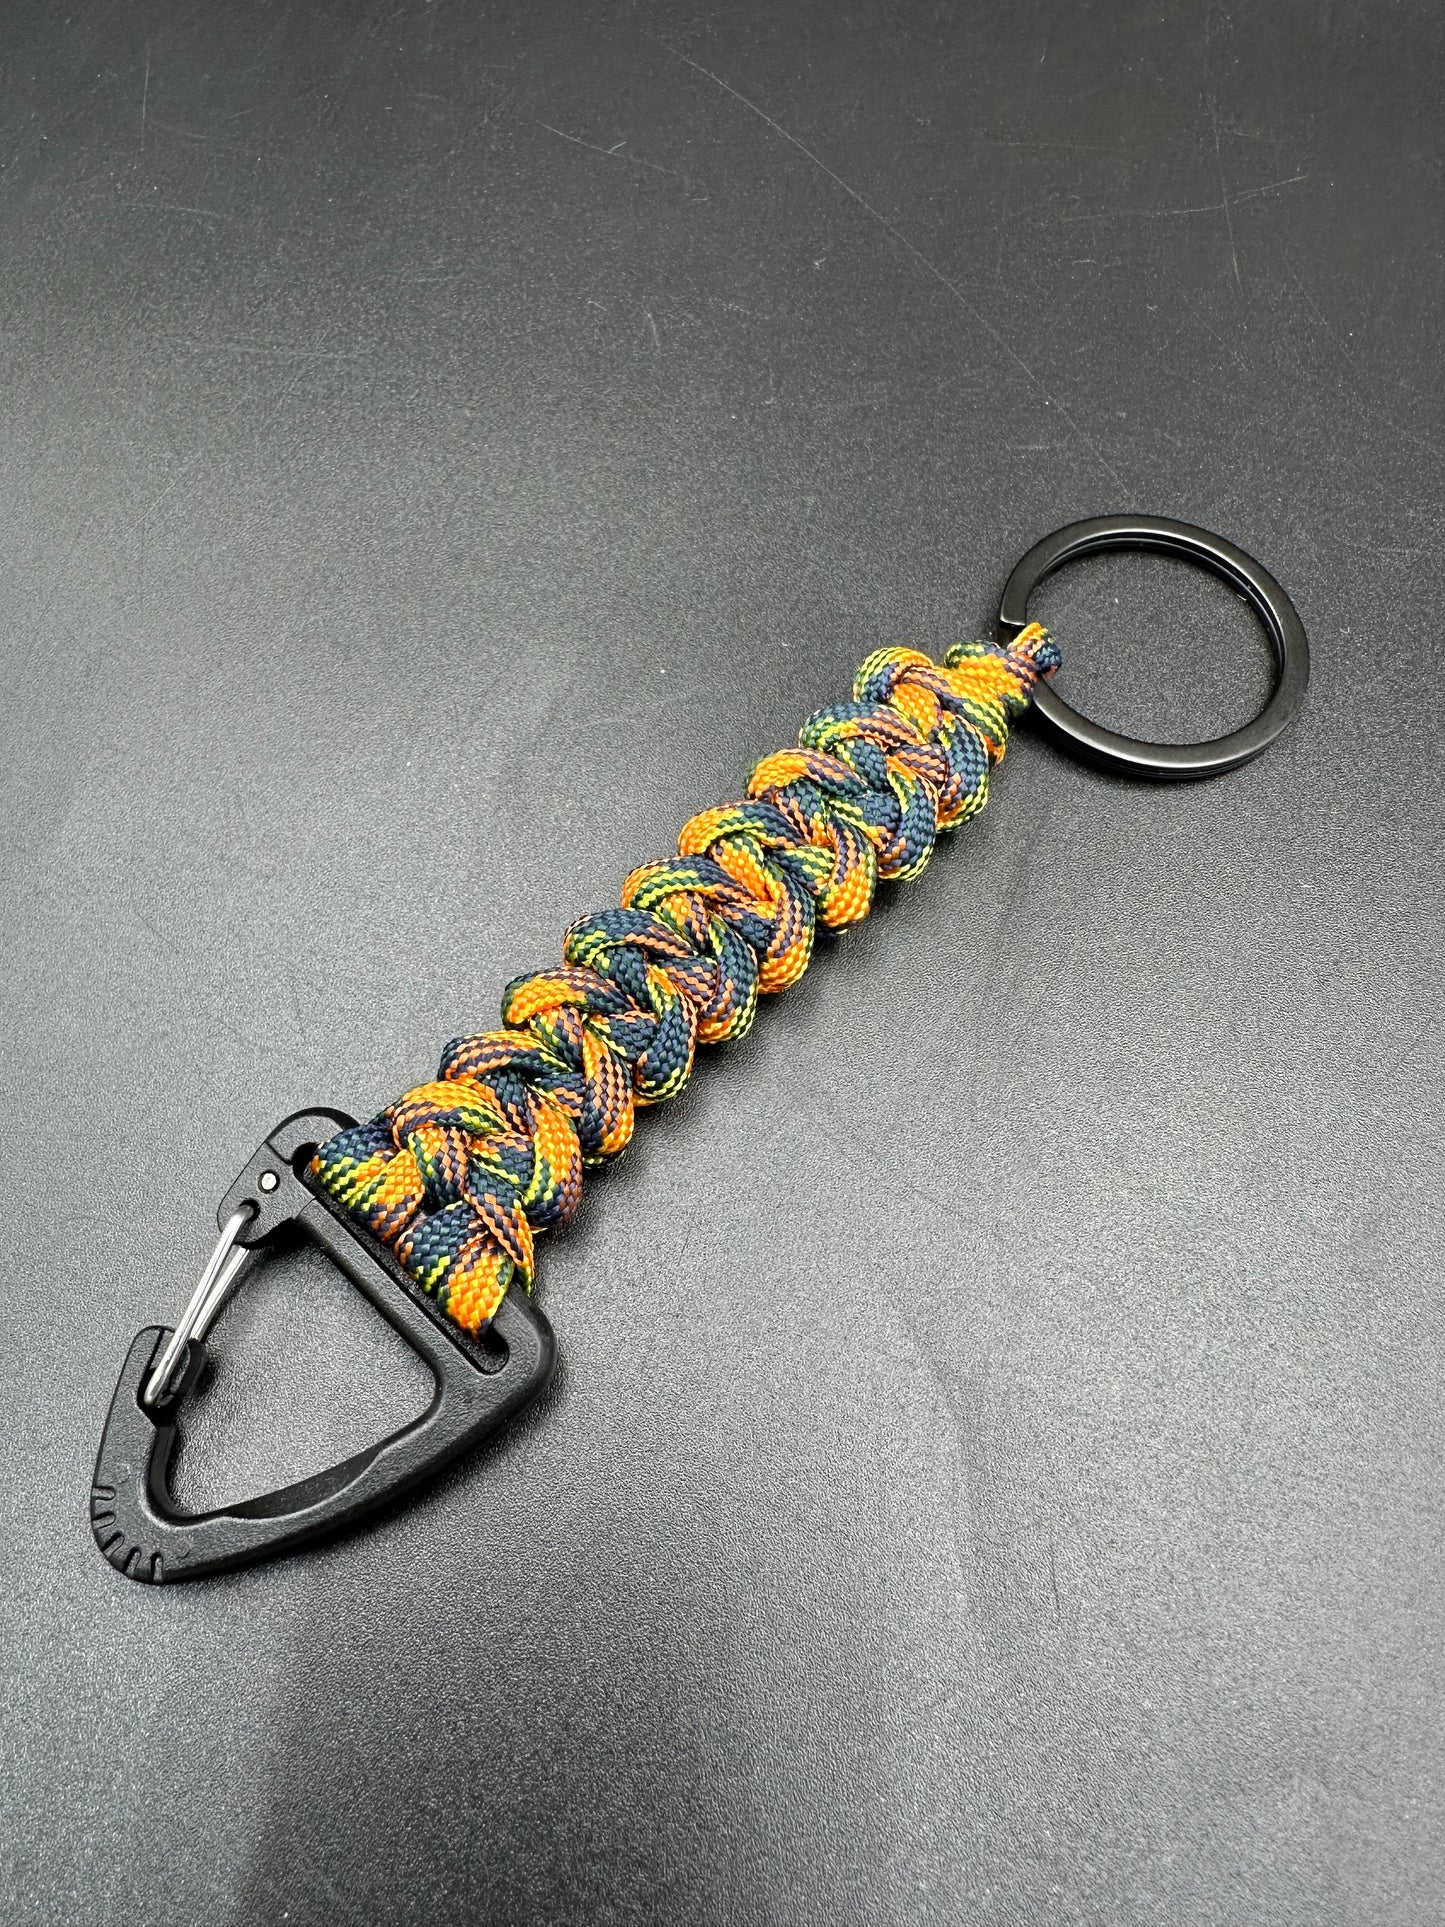 Tactical EDC Paracord keyring with triangle clip and key ring in orange jungle camouflage coloured shark jaw weave 